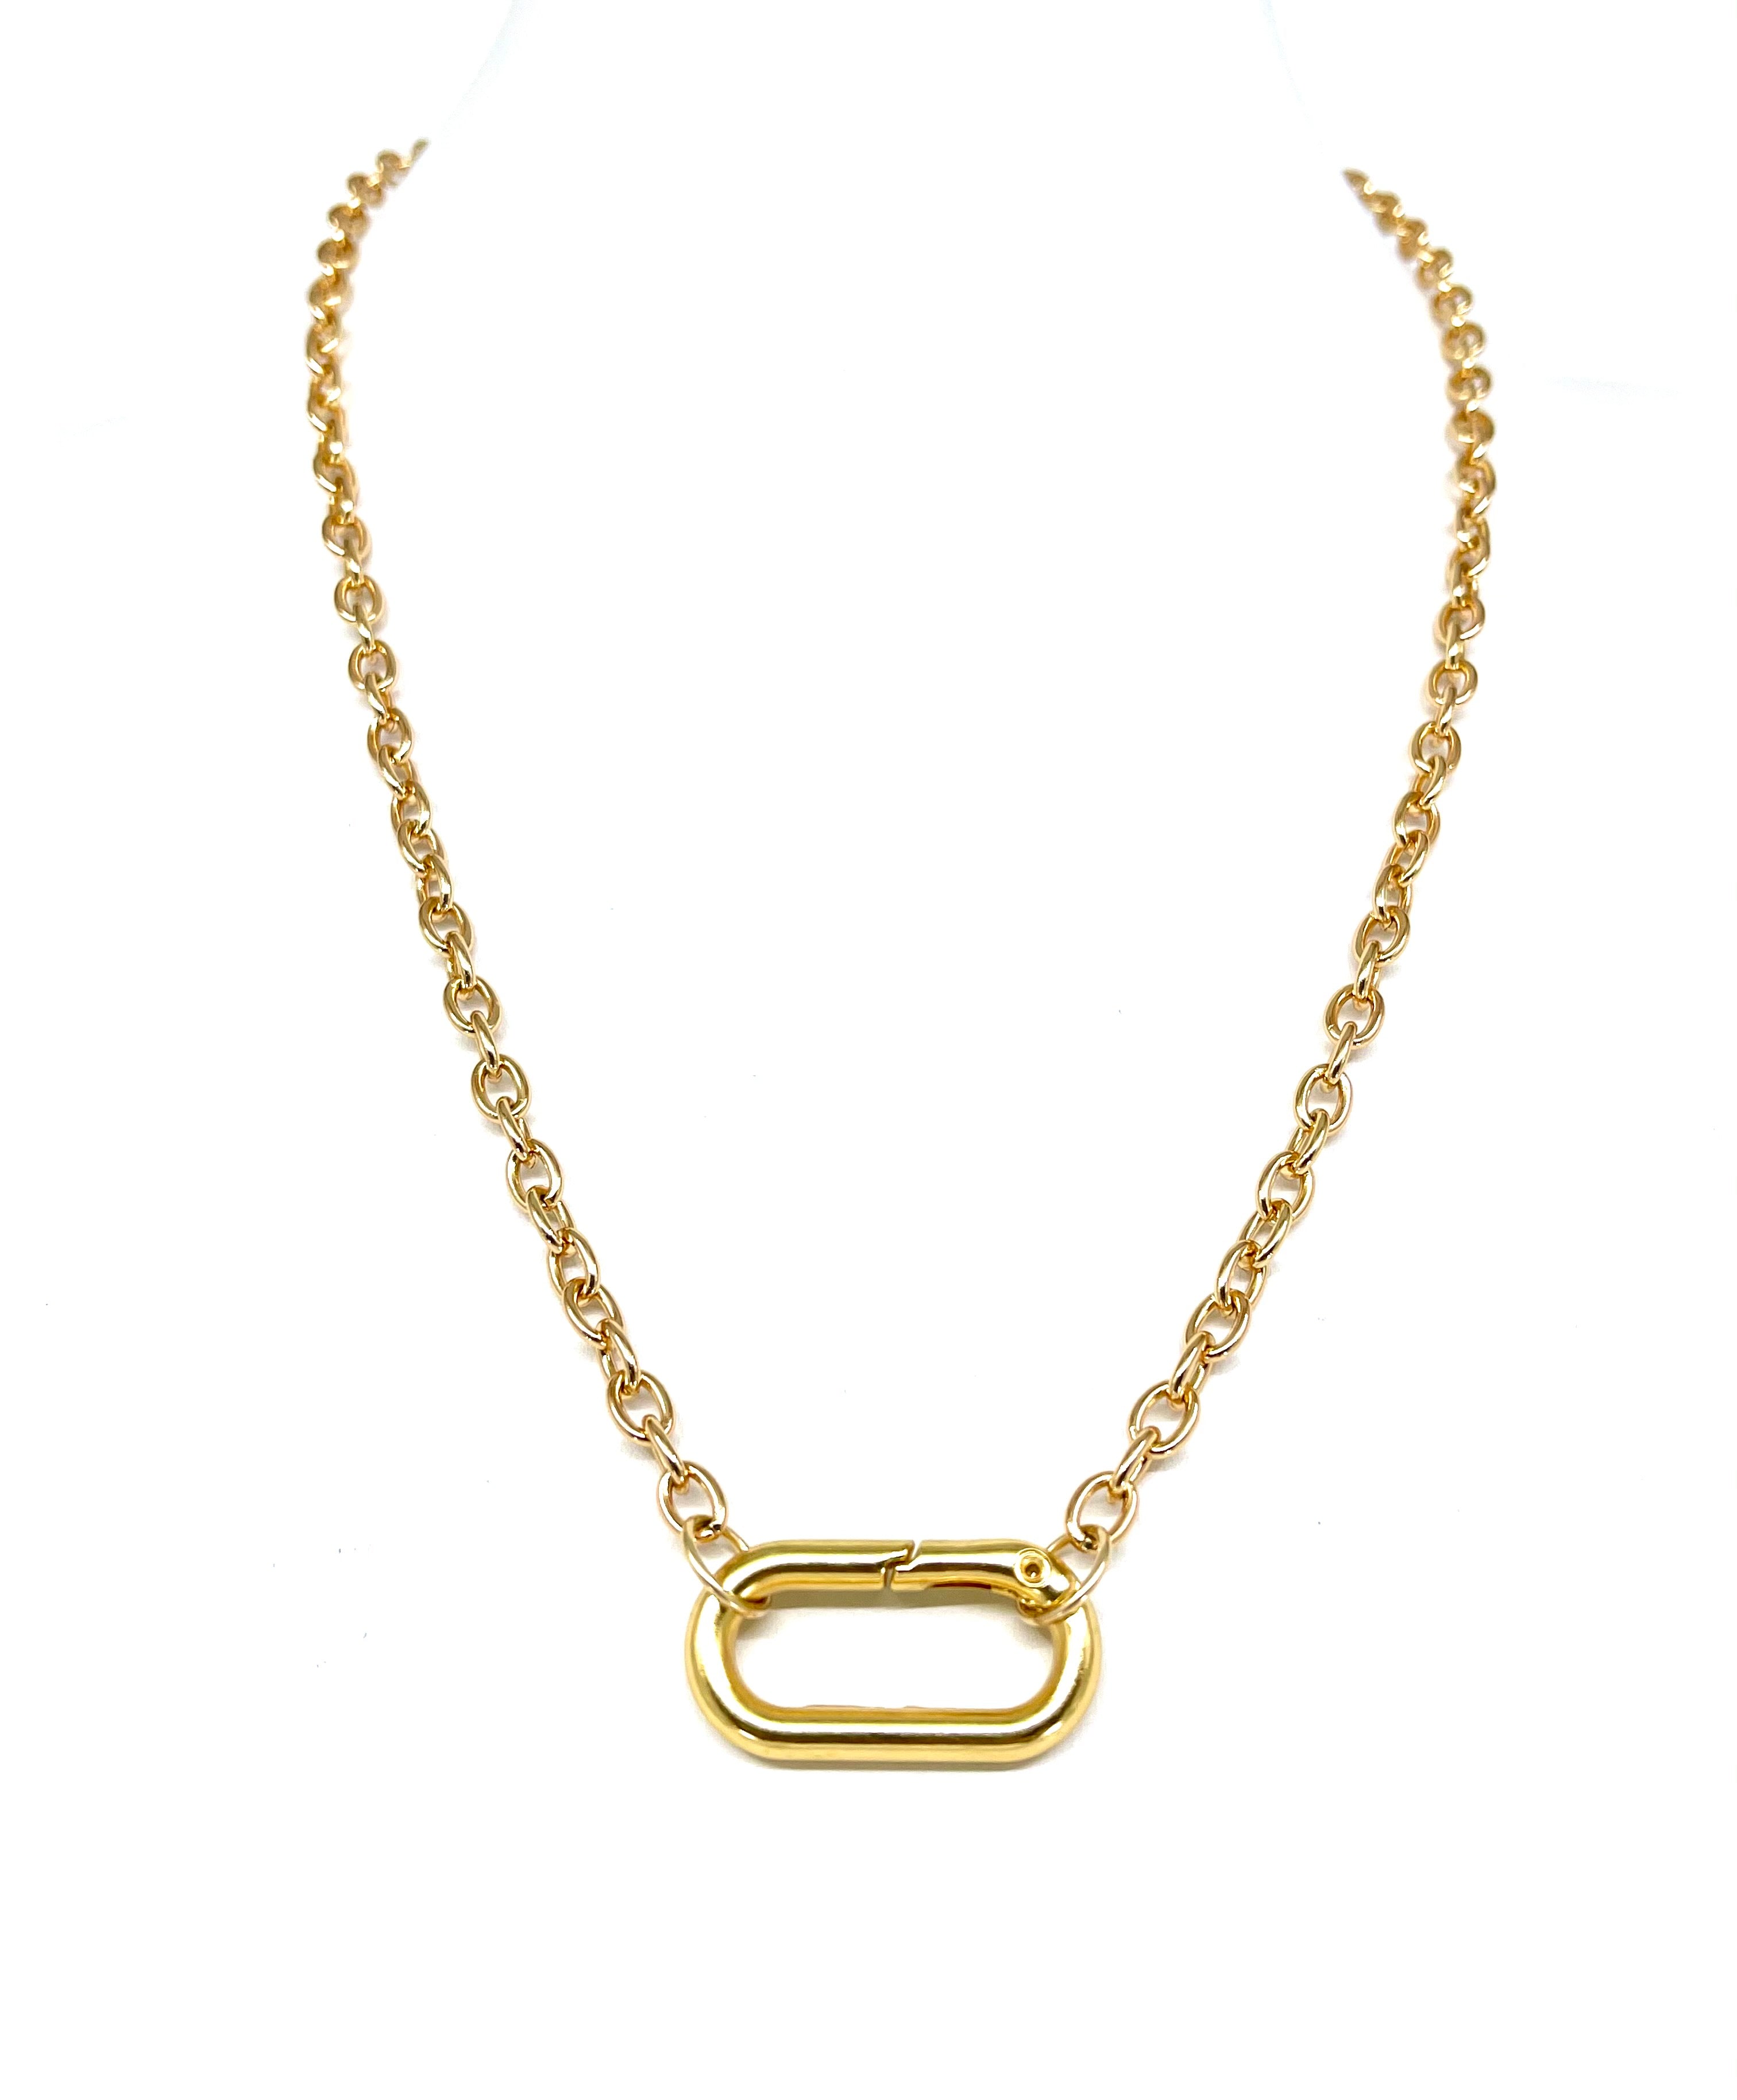 Gold Chain Link Necklace with Multicolor Star Carabiner Clip